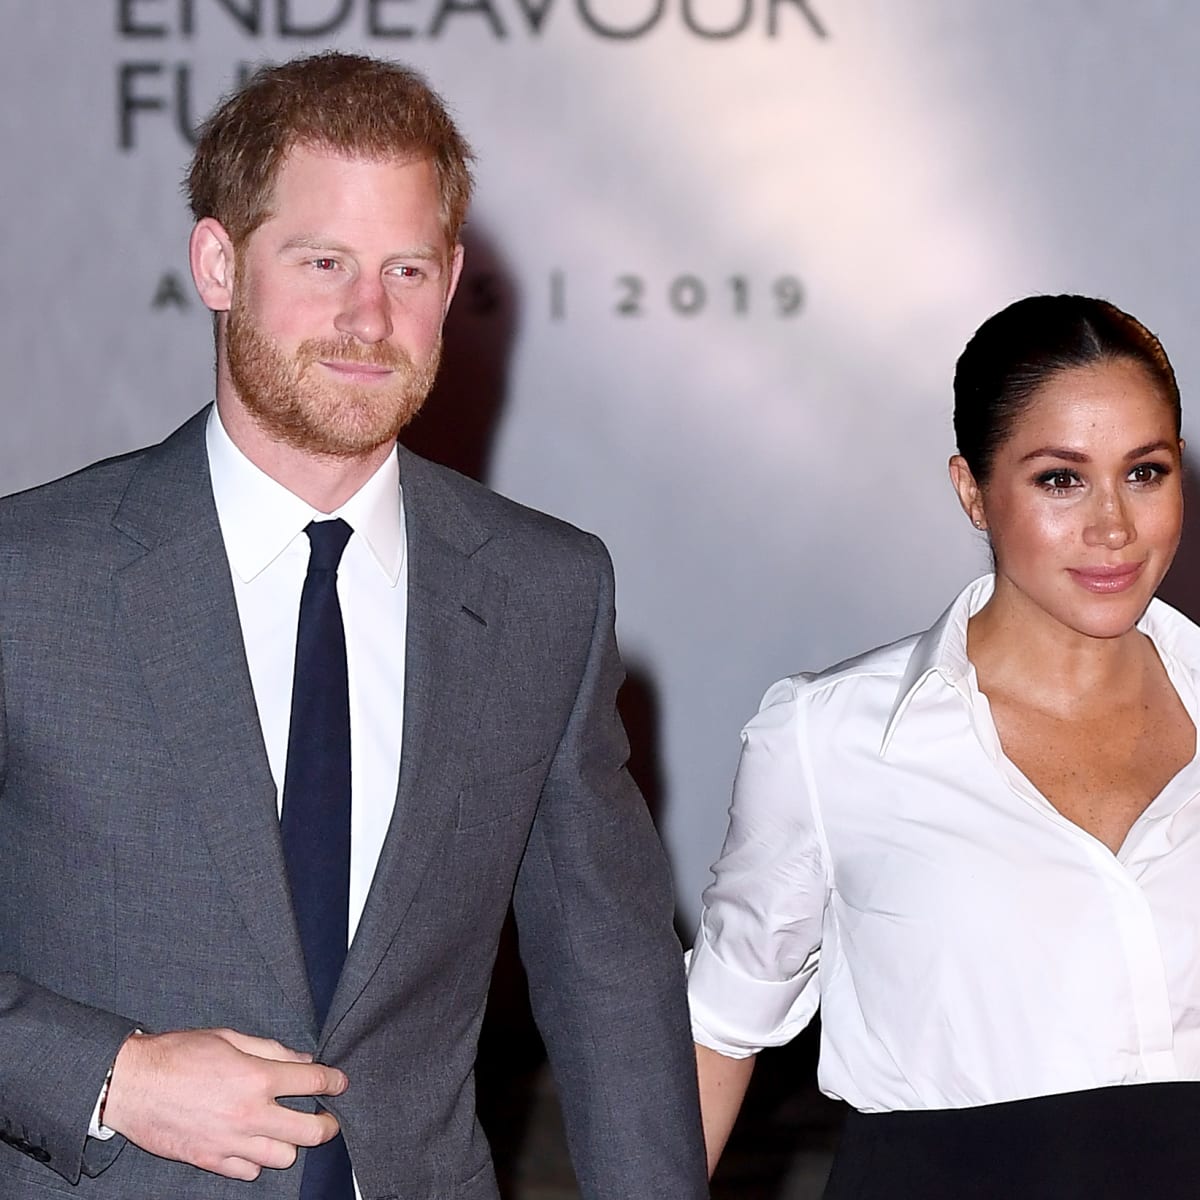 What is the stance of fashion giants Chanel, Givenchy, and Hermès regarding  their connection with Meghan Markle? - Quora